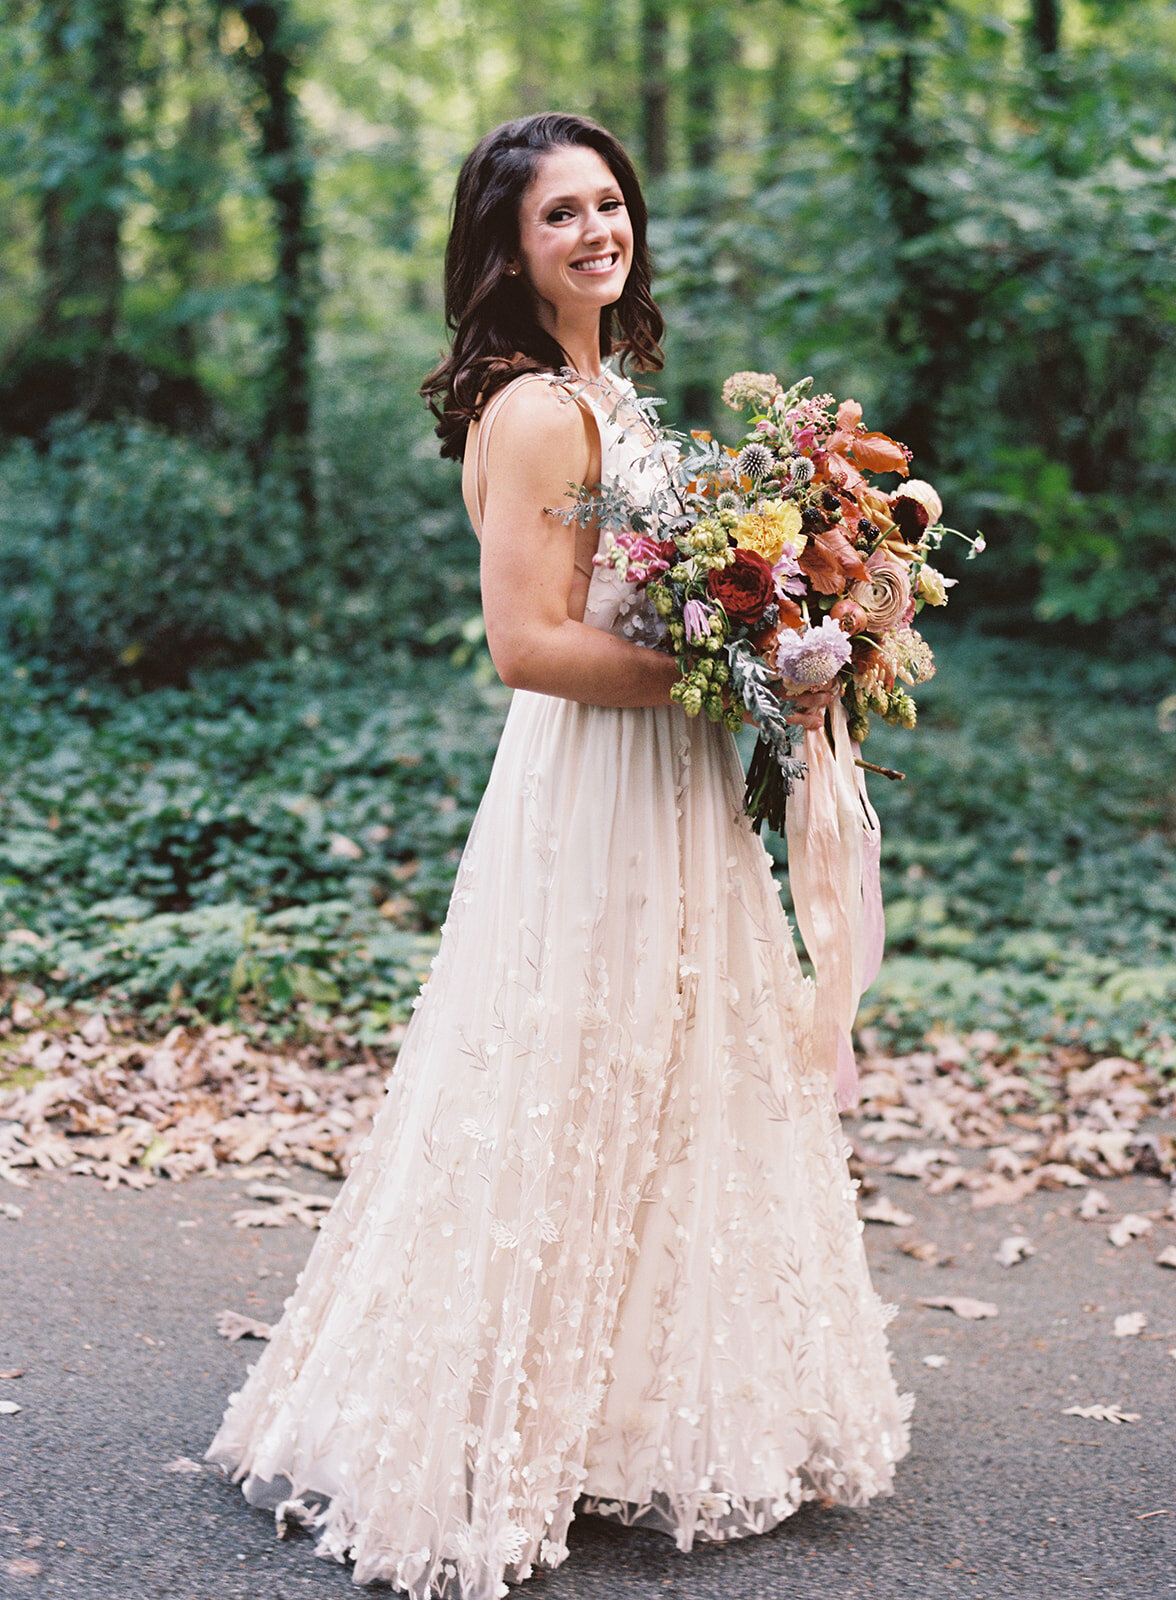 Lush, untamed bridal bouquet with garden roses, wildflowers, hops, blackberries, fruiting branches, ranunculus, copper beech, and natural greenery. Early fall RT Lodge wedding floral design by Rosemary & Finch, Nashville based florist.